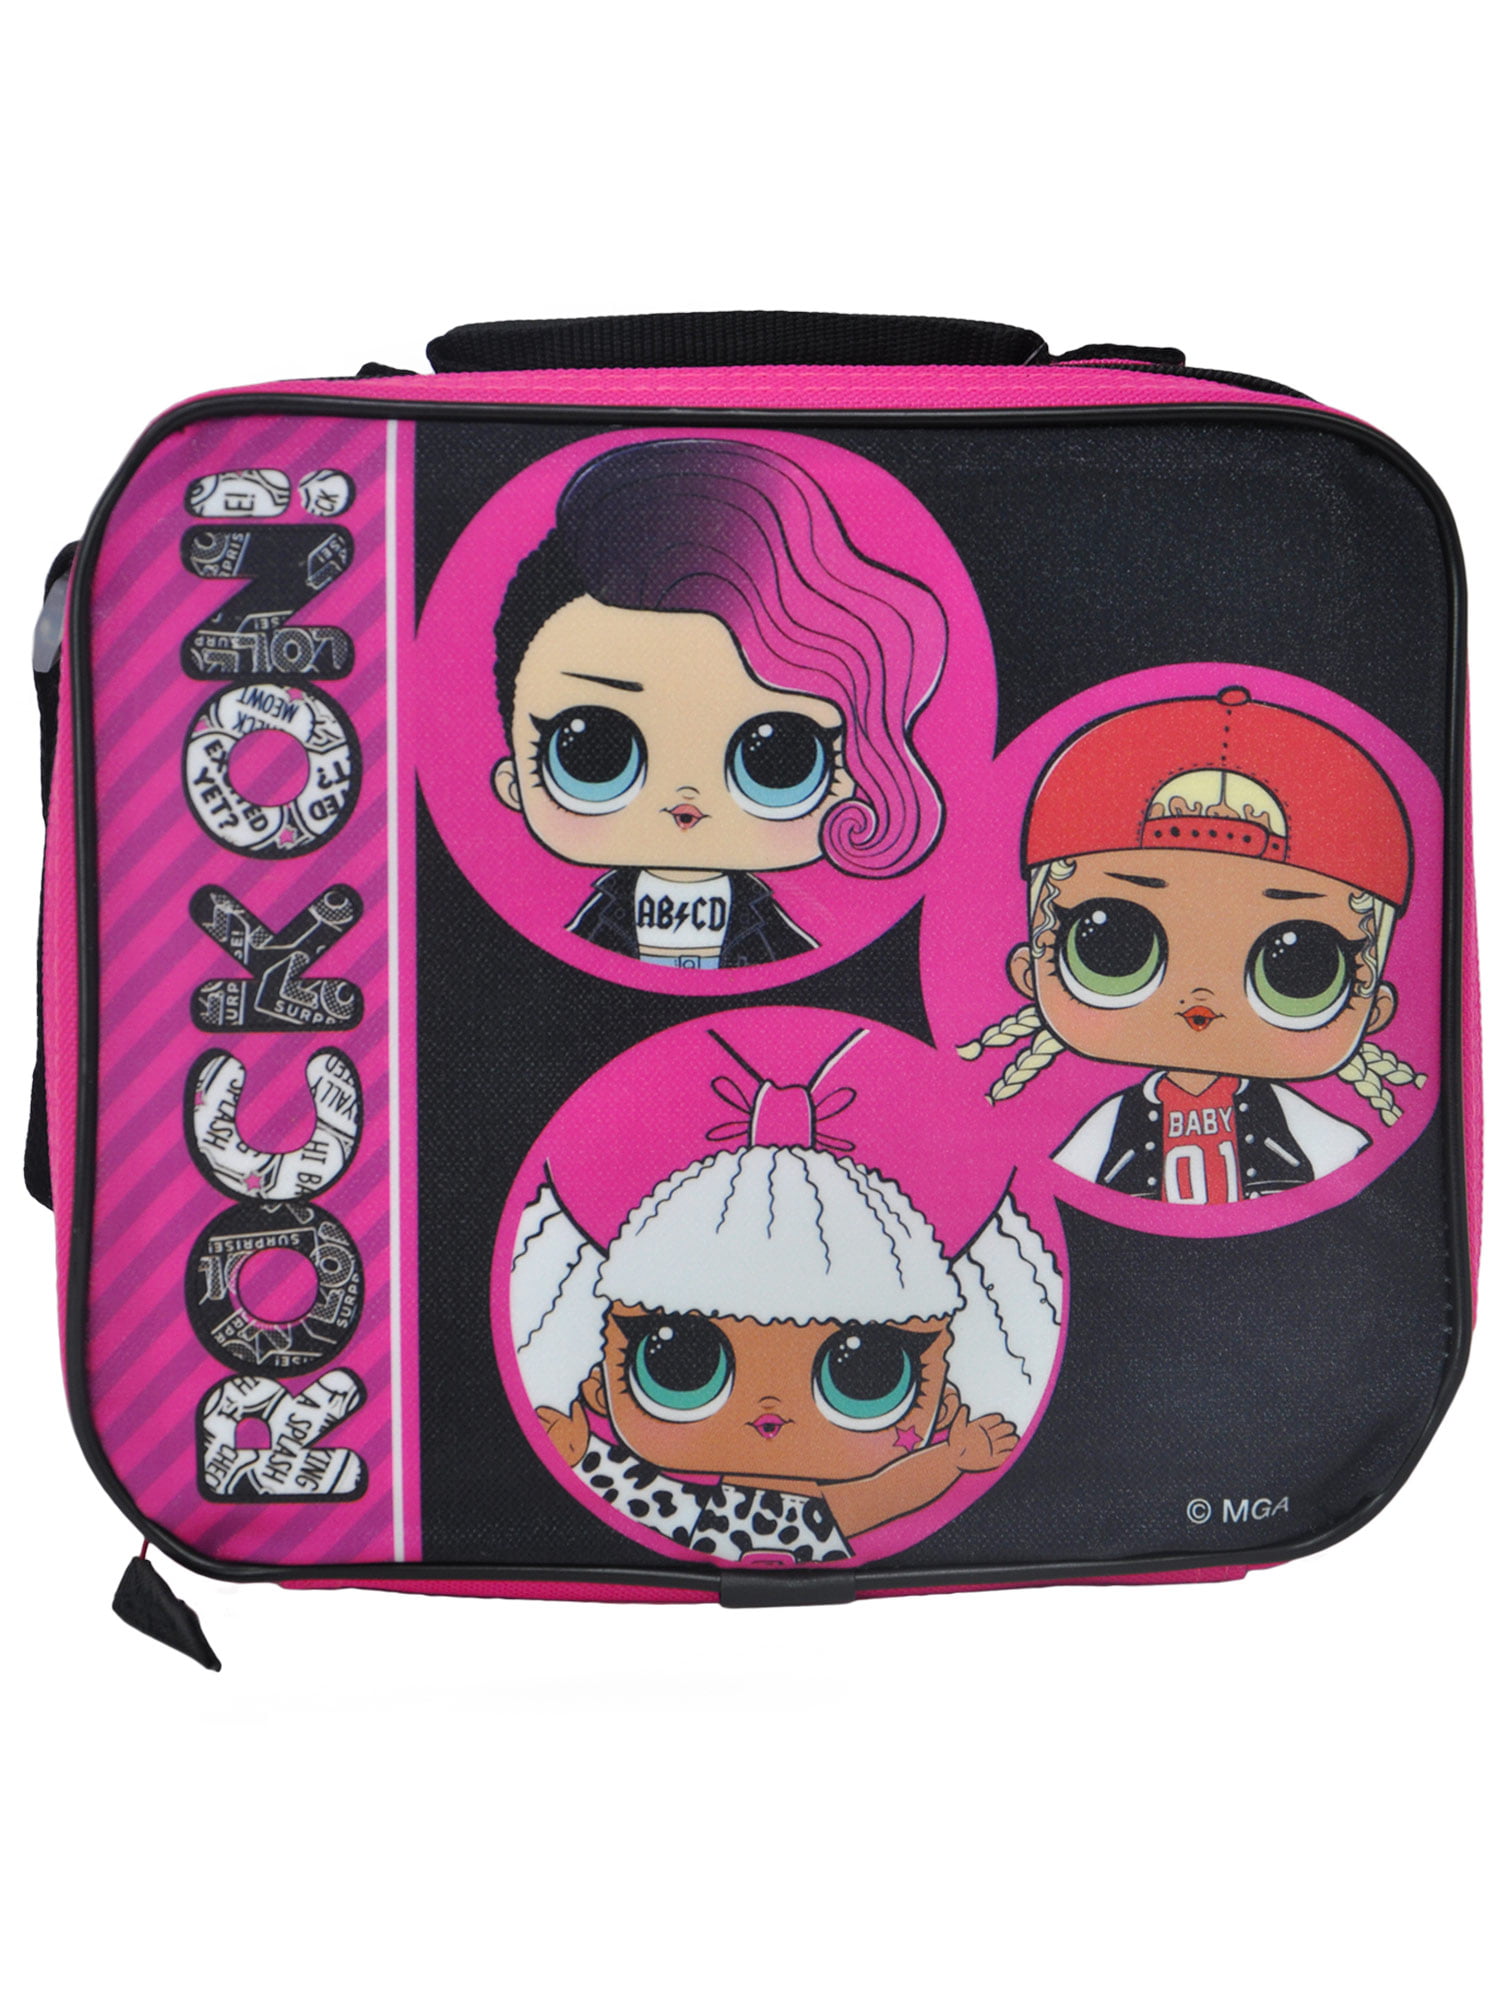 LOL SURPRISE GIFT INSULATED LUNCH BOX BAG GIRLS PINK TRAVEL SNACK BOX BABY DOLL 